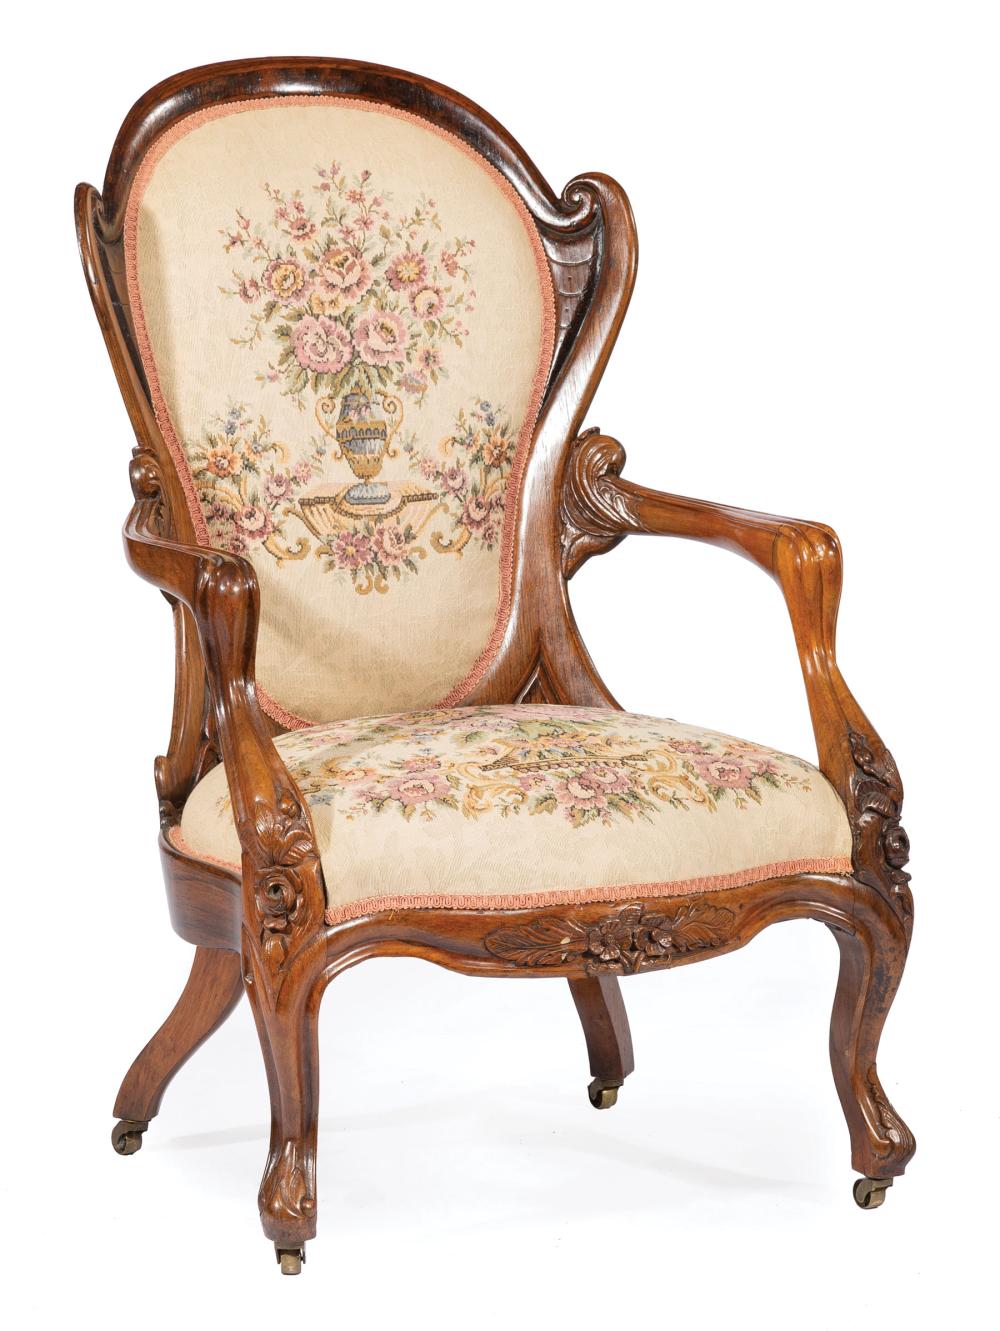 ROCOCO CARVED AND LAMINATED ROSEWOOD